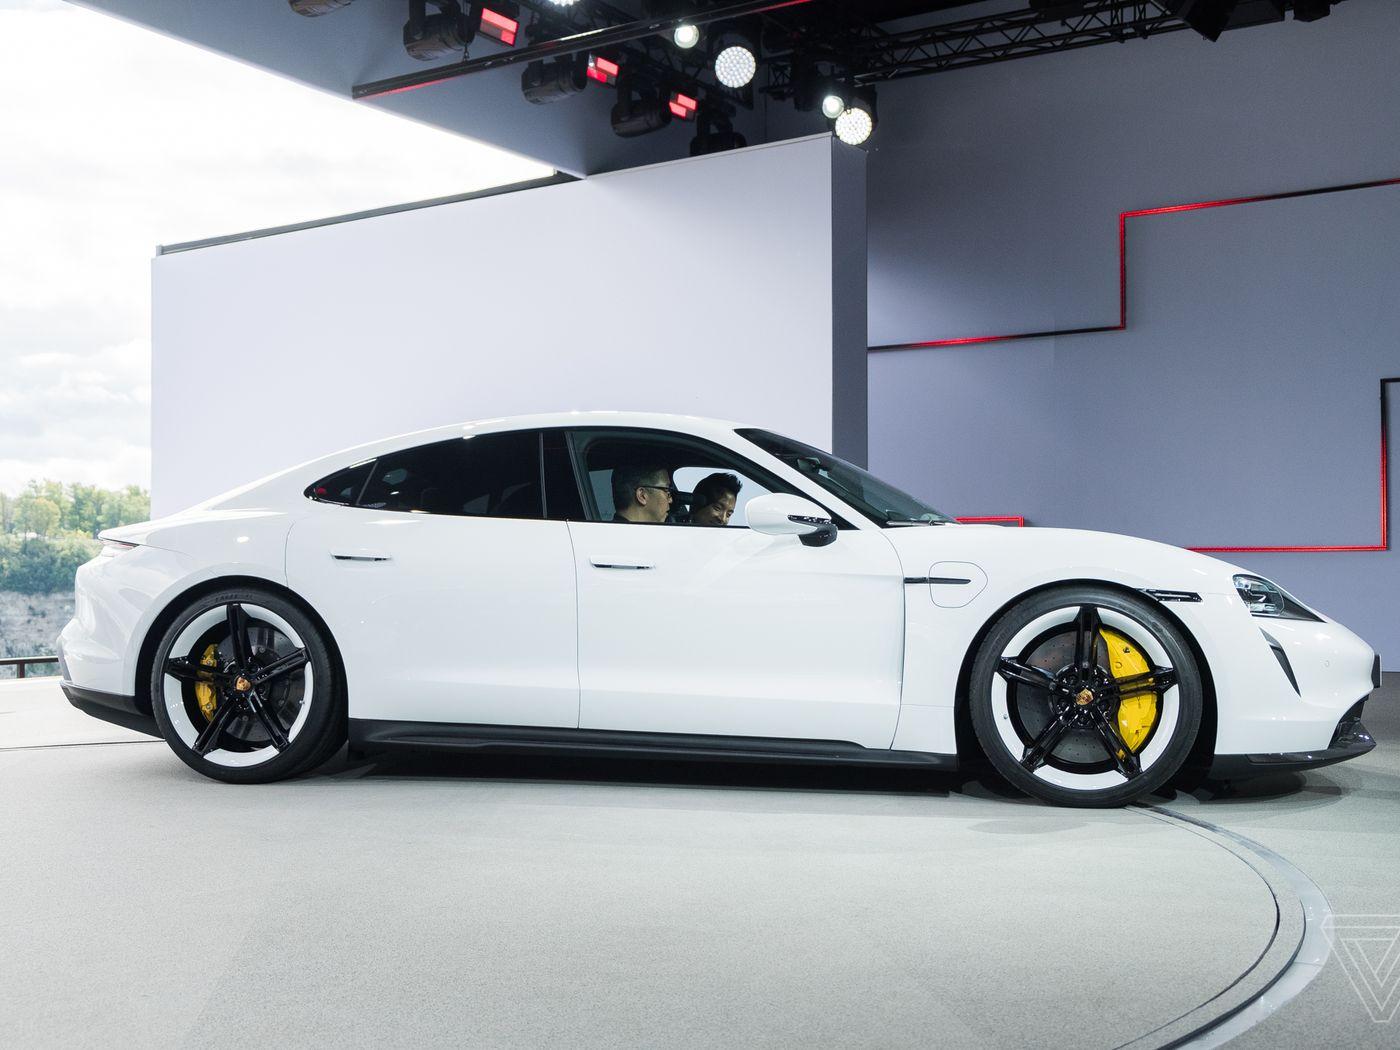 Up close with the Taycan, Porsche's first electric car